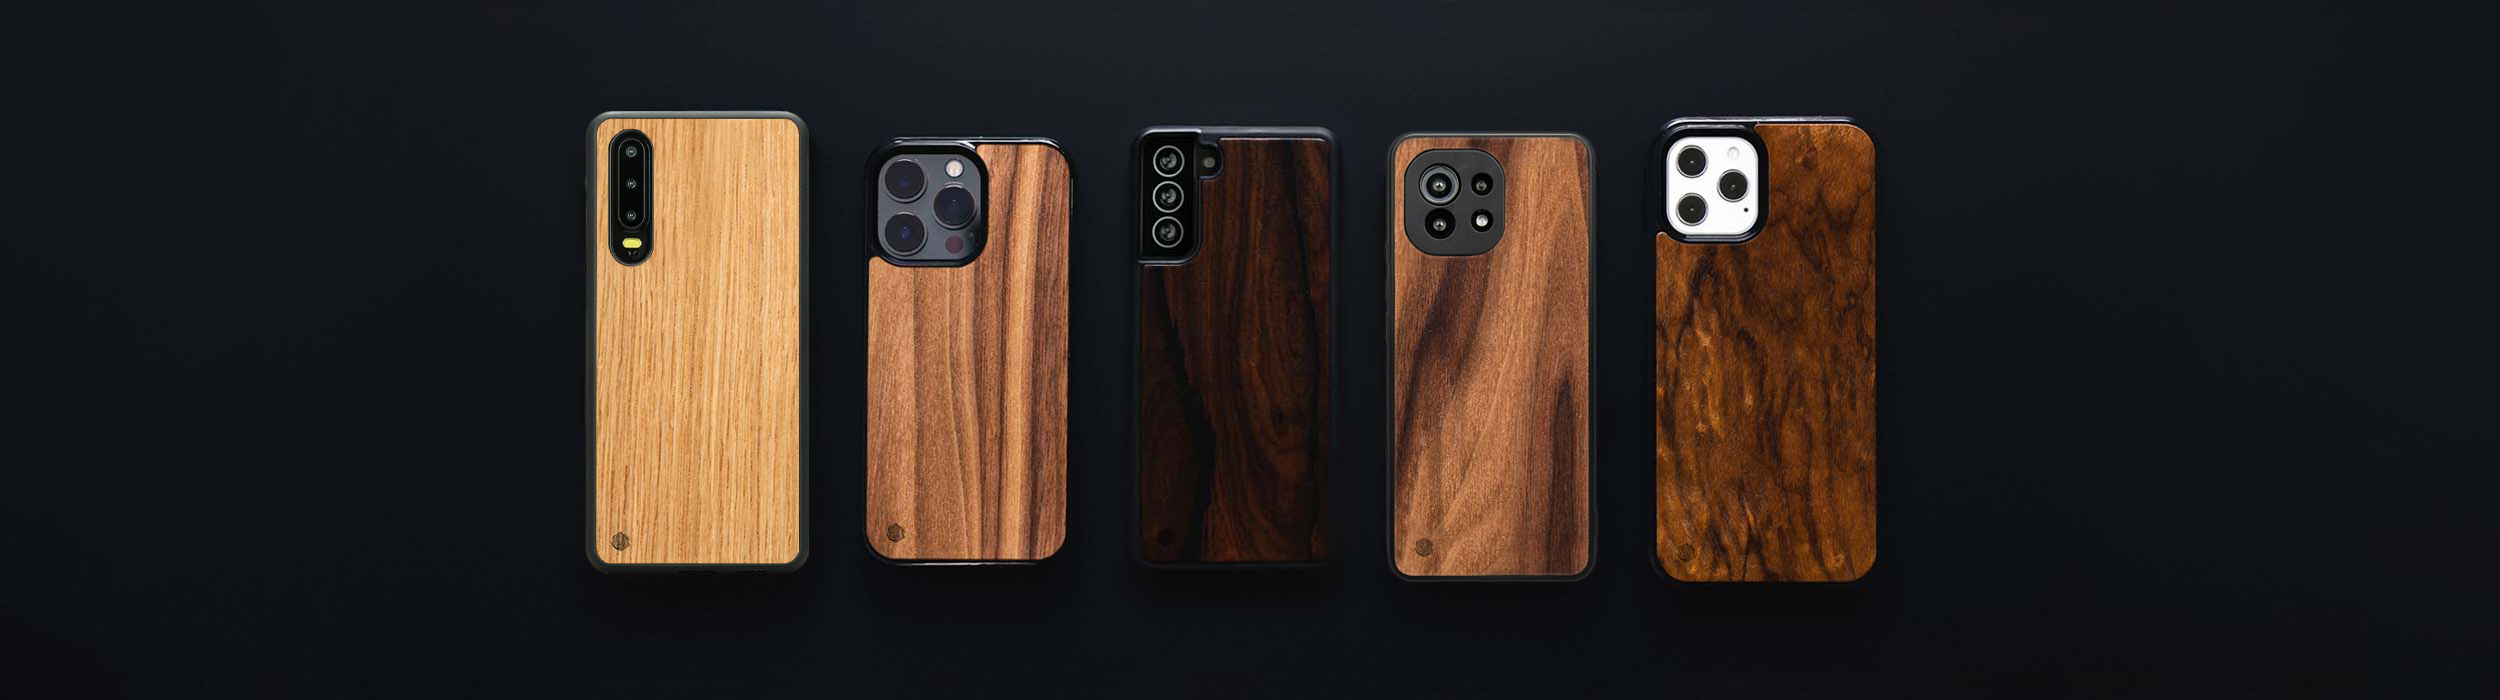 Huawei Wooden Phone Cases